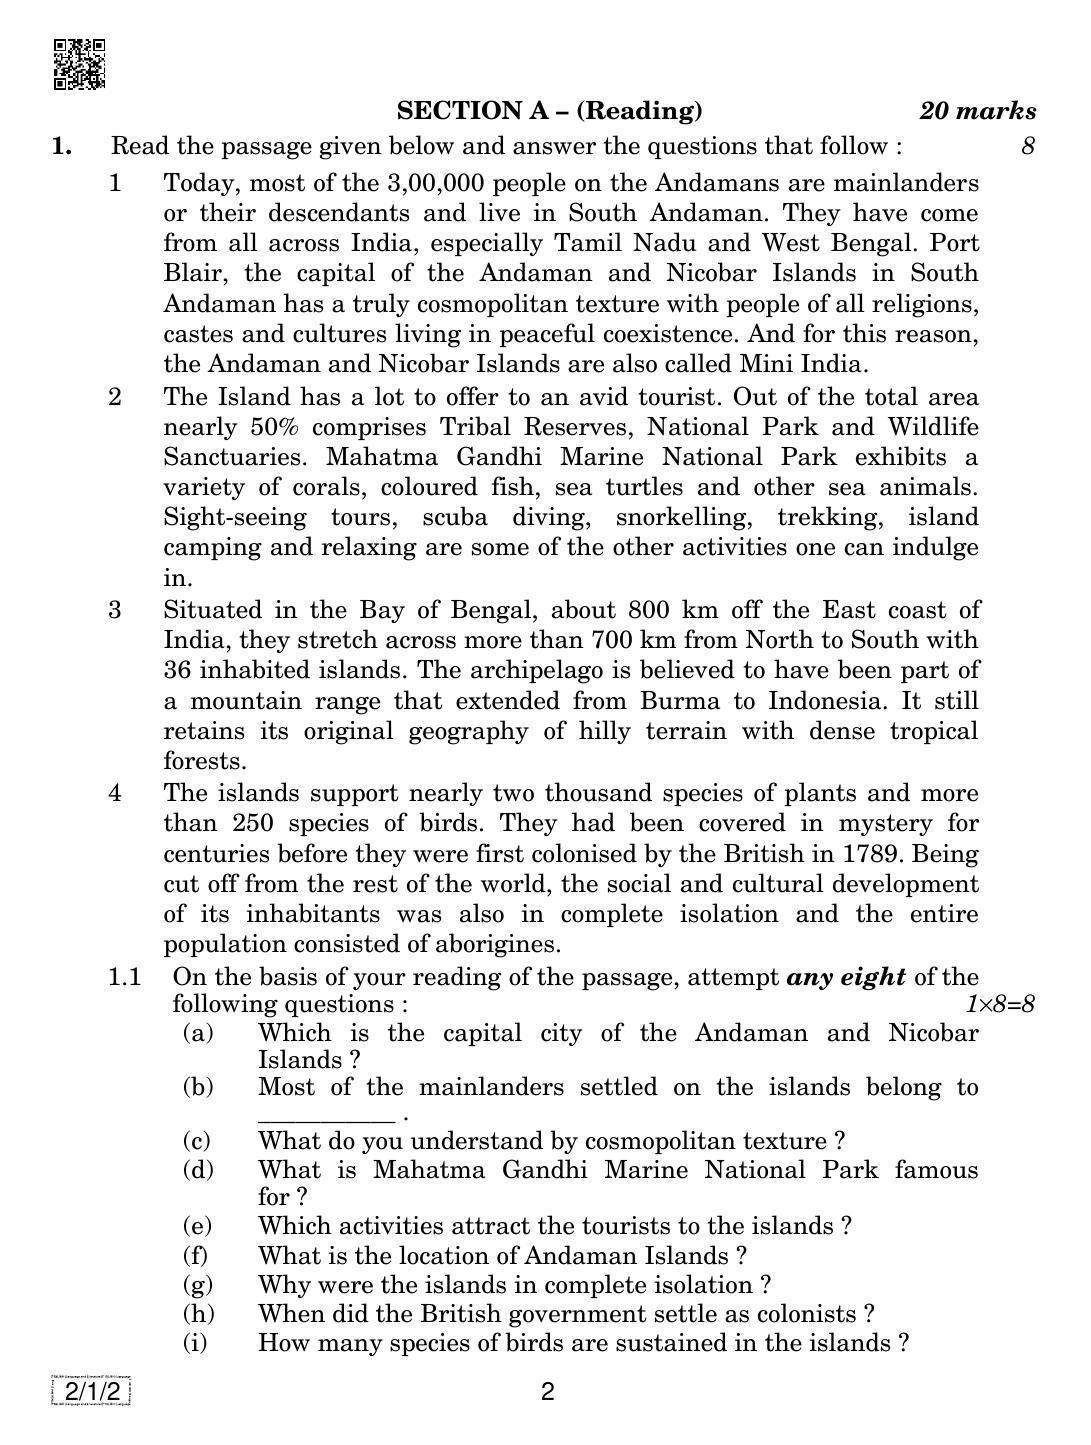 CBSE Class 10 2-1-2 ENGLISH LANG. & LIT. 2019 Compartment Question Paper - Page 2